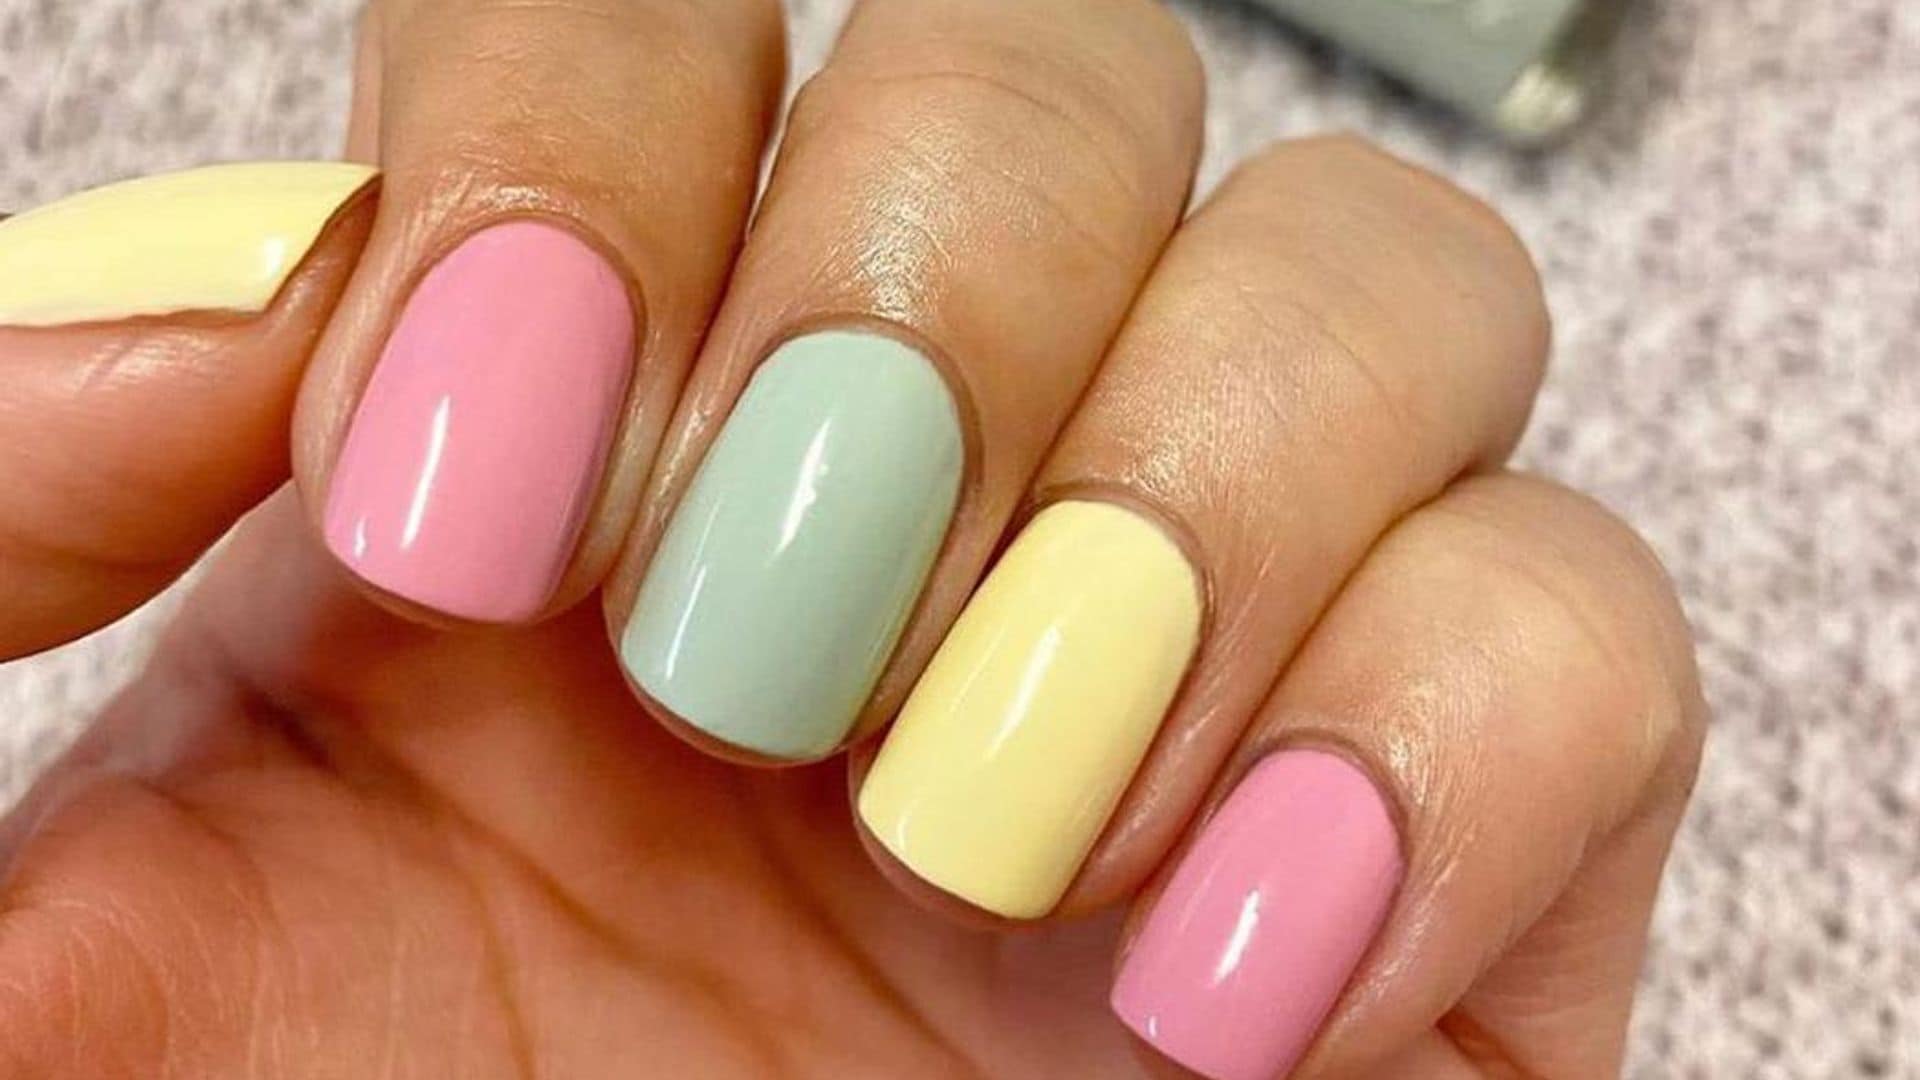 10 Spring nail designs you can try at home to celebrate Easter this year